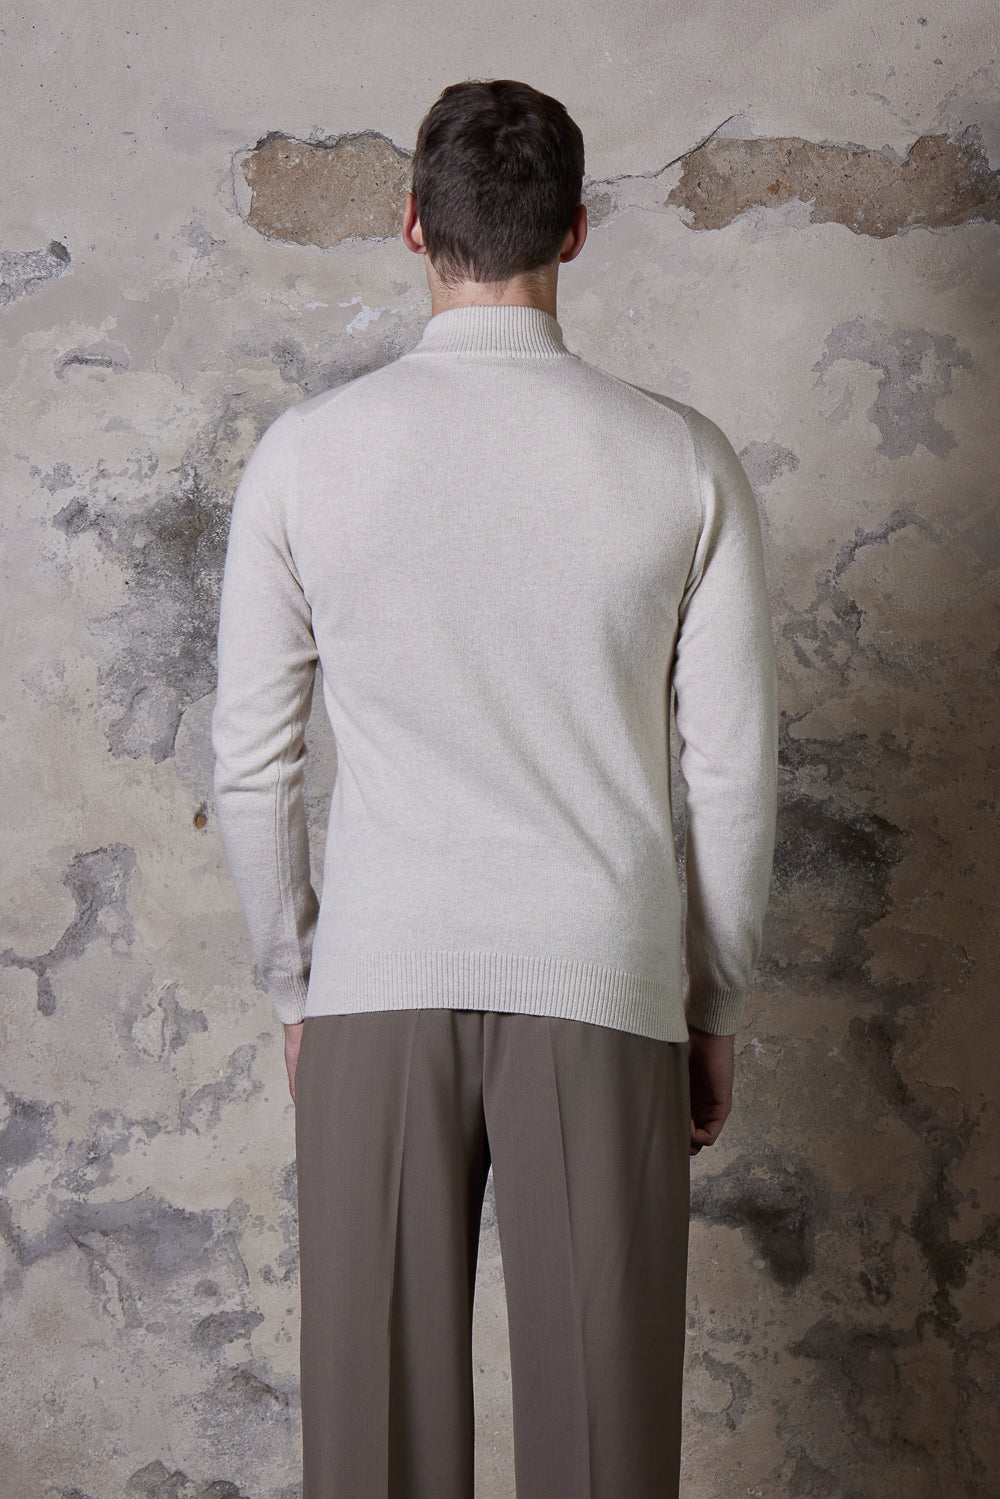 Buy the Daniele Fiesoli Italian Wool Turtle Neck Sweatshirt in Cream at Intro. Spend £50 for free UK delivery. Official stockists. We ship worldwide.